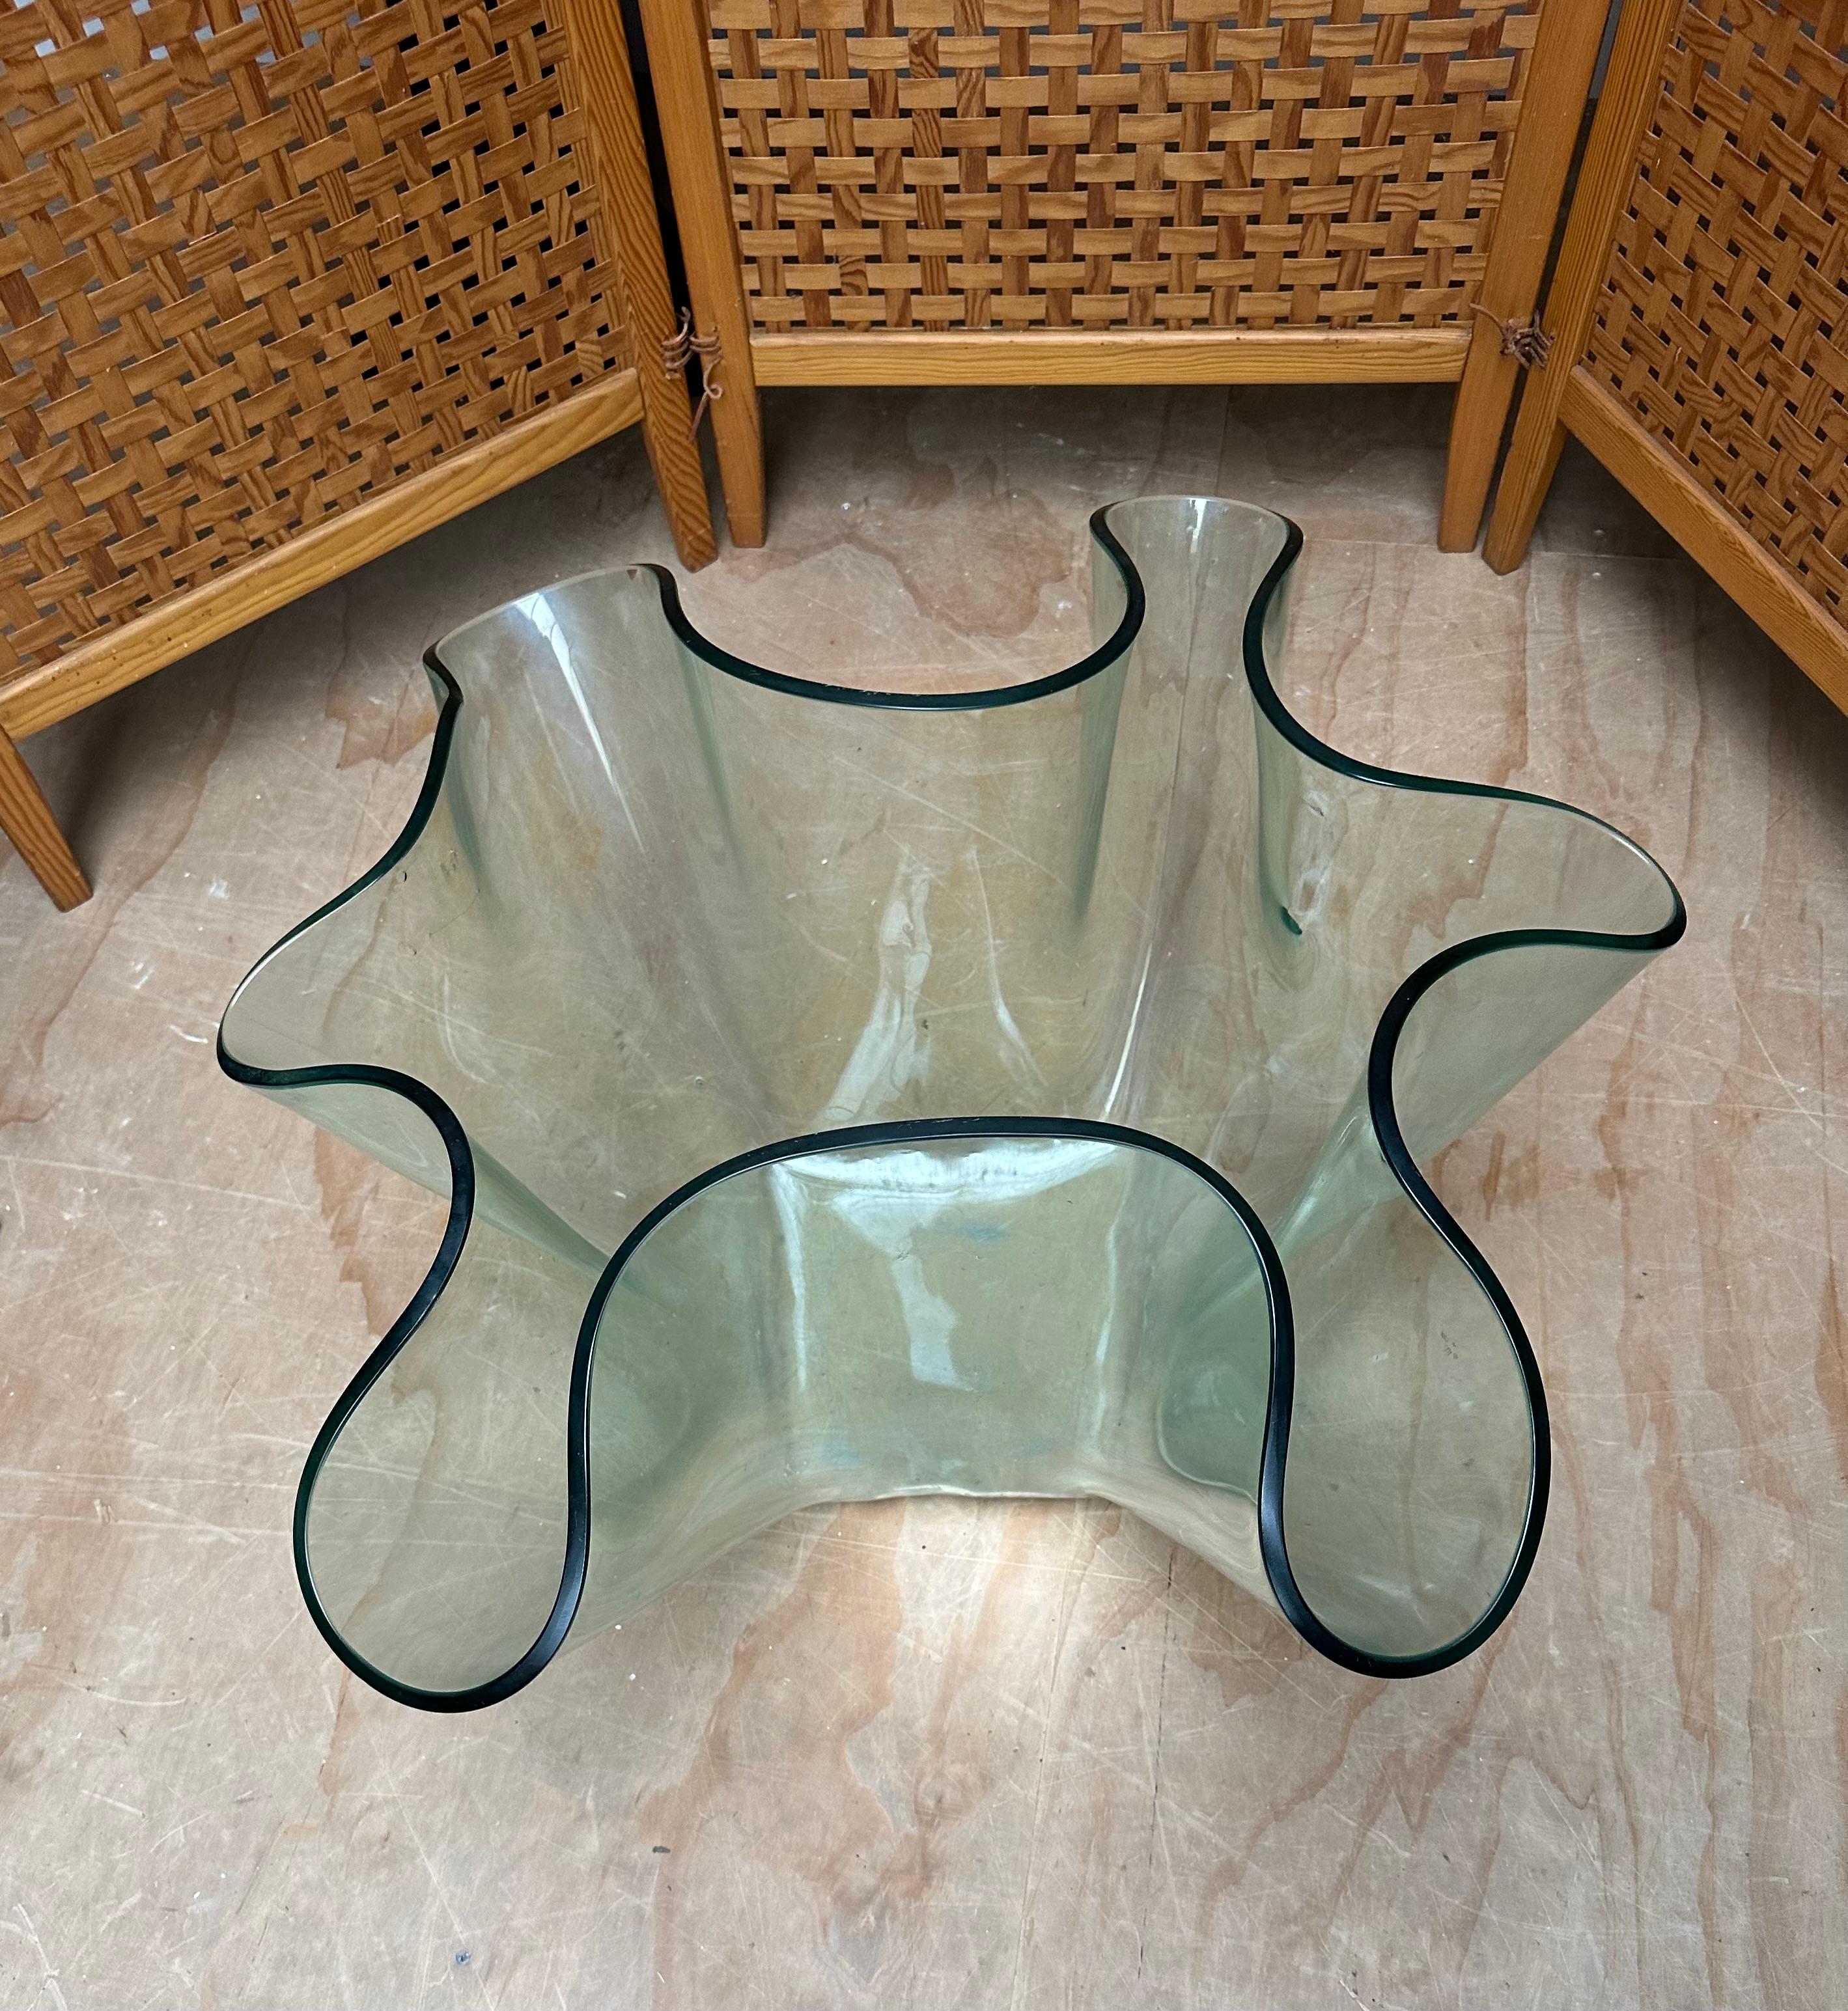 Exceptional Strong & Thick Curved Design Murano, Glass Art Floor Jardiniere Vase For Sale 5